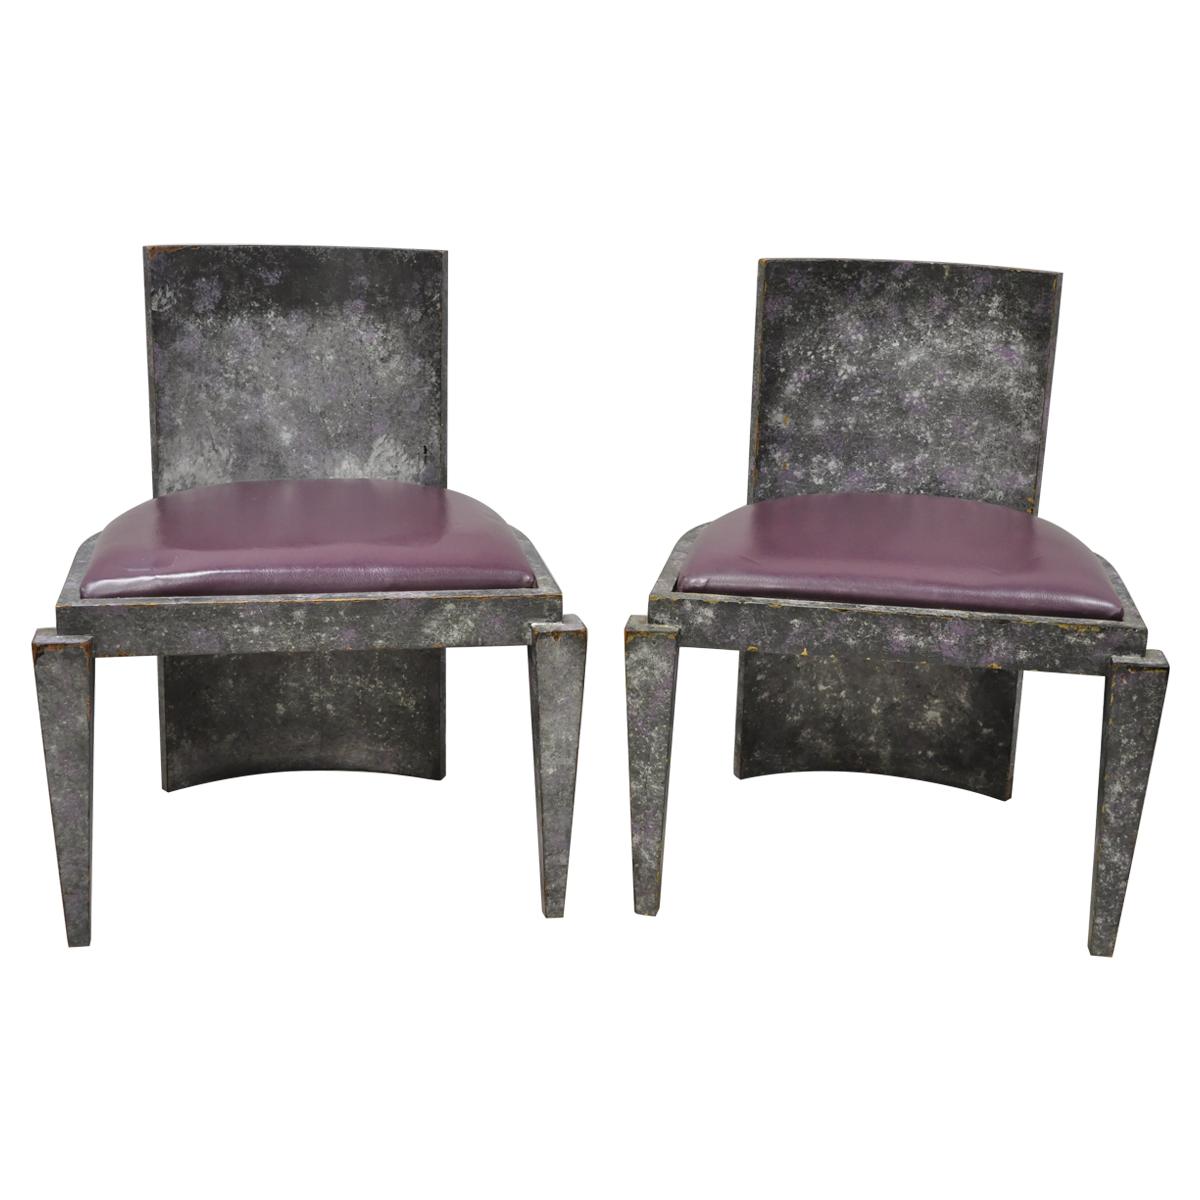 Vintage Mid-Century Modern Art Deco Purple and Gray Club Game Chairs, a Pair For Sale